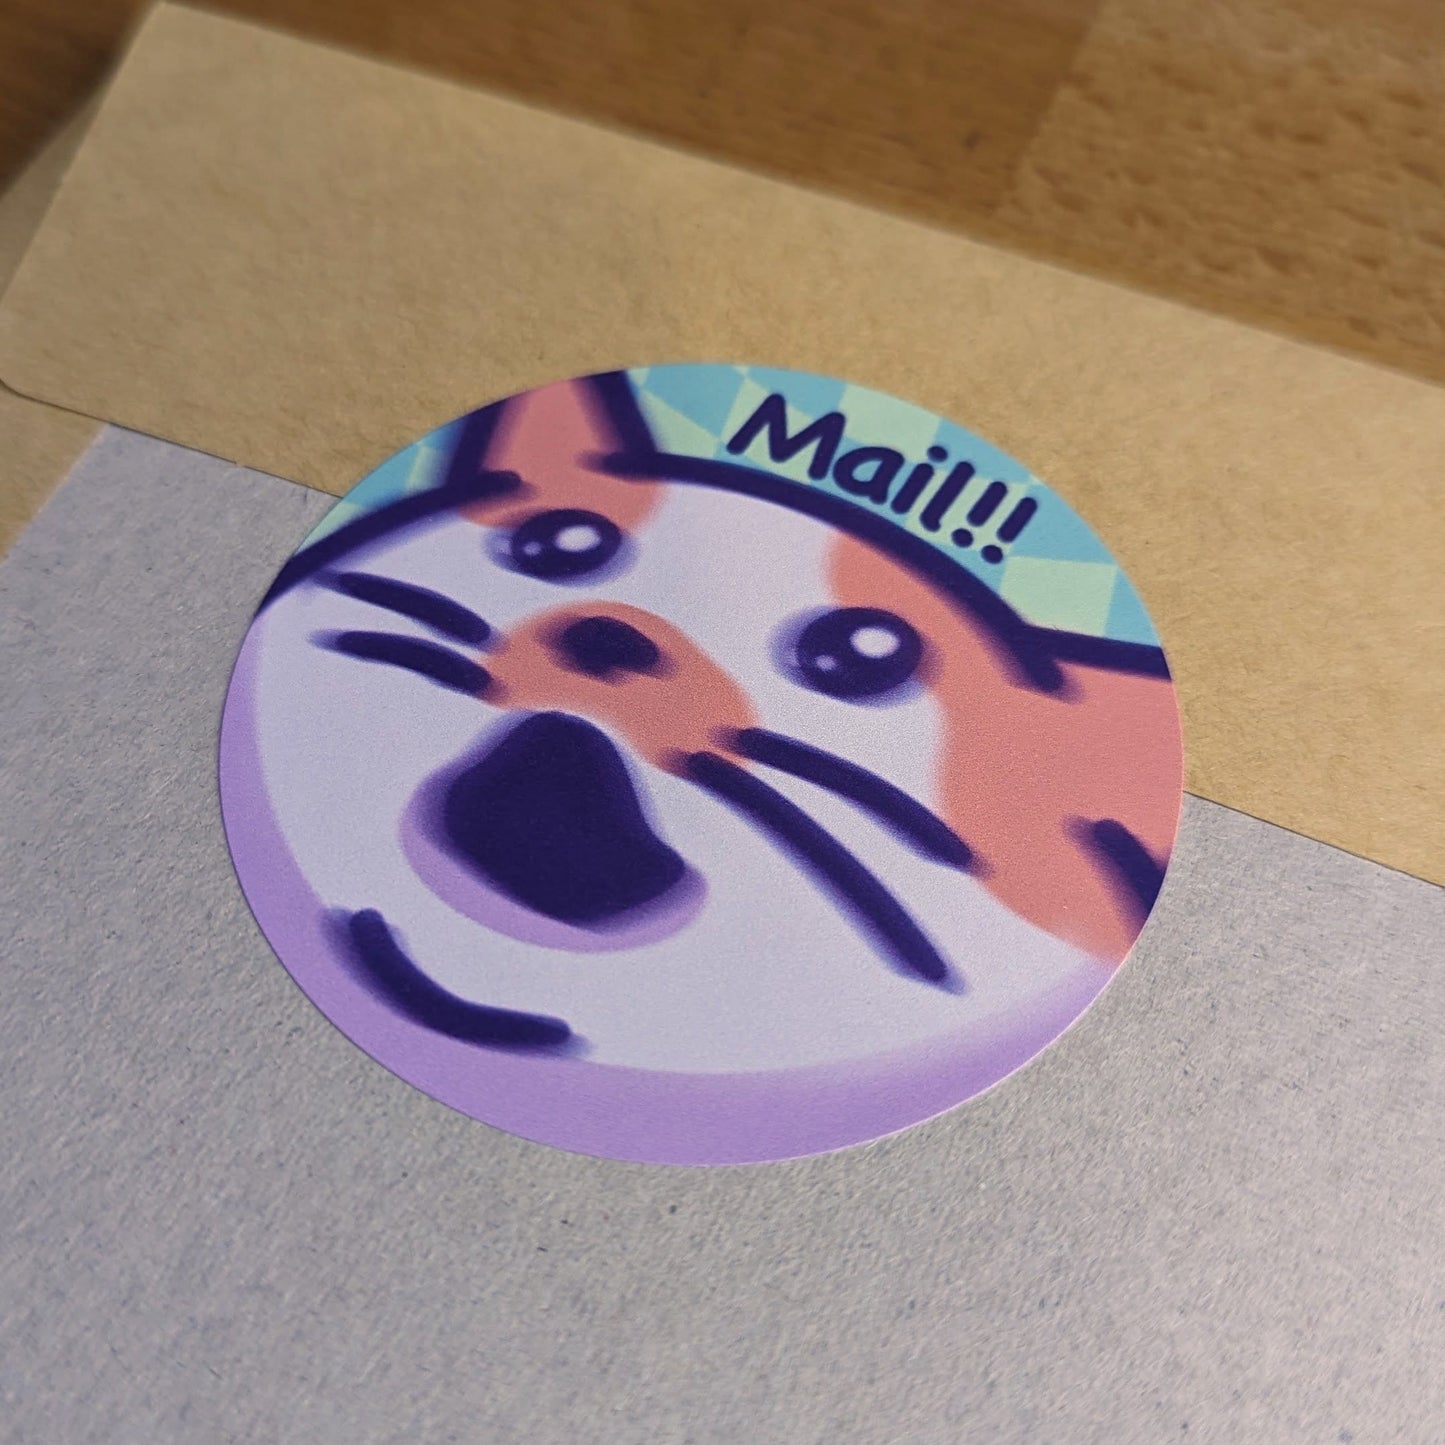 Cute Cat Packaging Sticker Set | Mail! | Envelope/Gift Seal for Christmas, Birthday, Small Business | Recyclable Circle Bundle